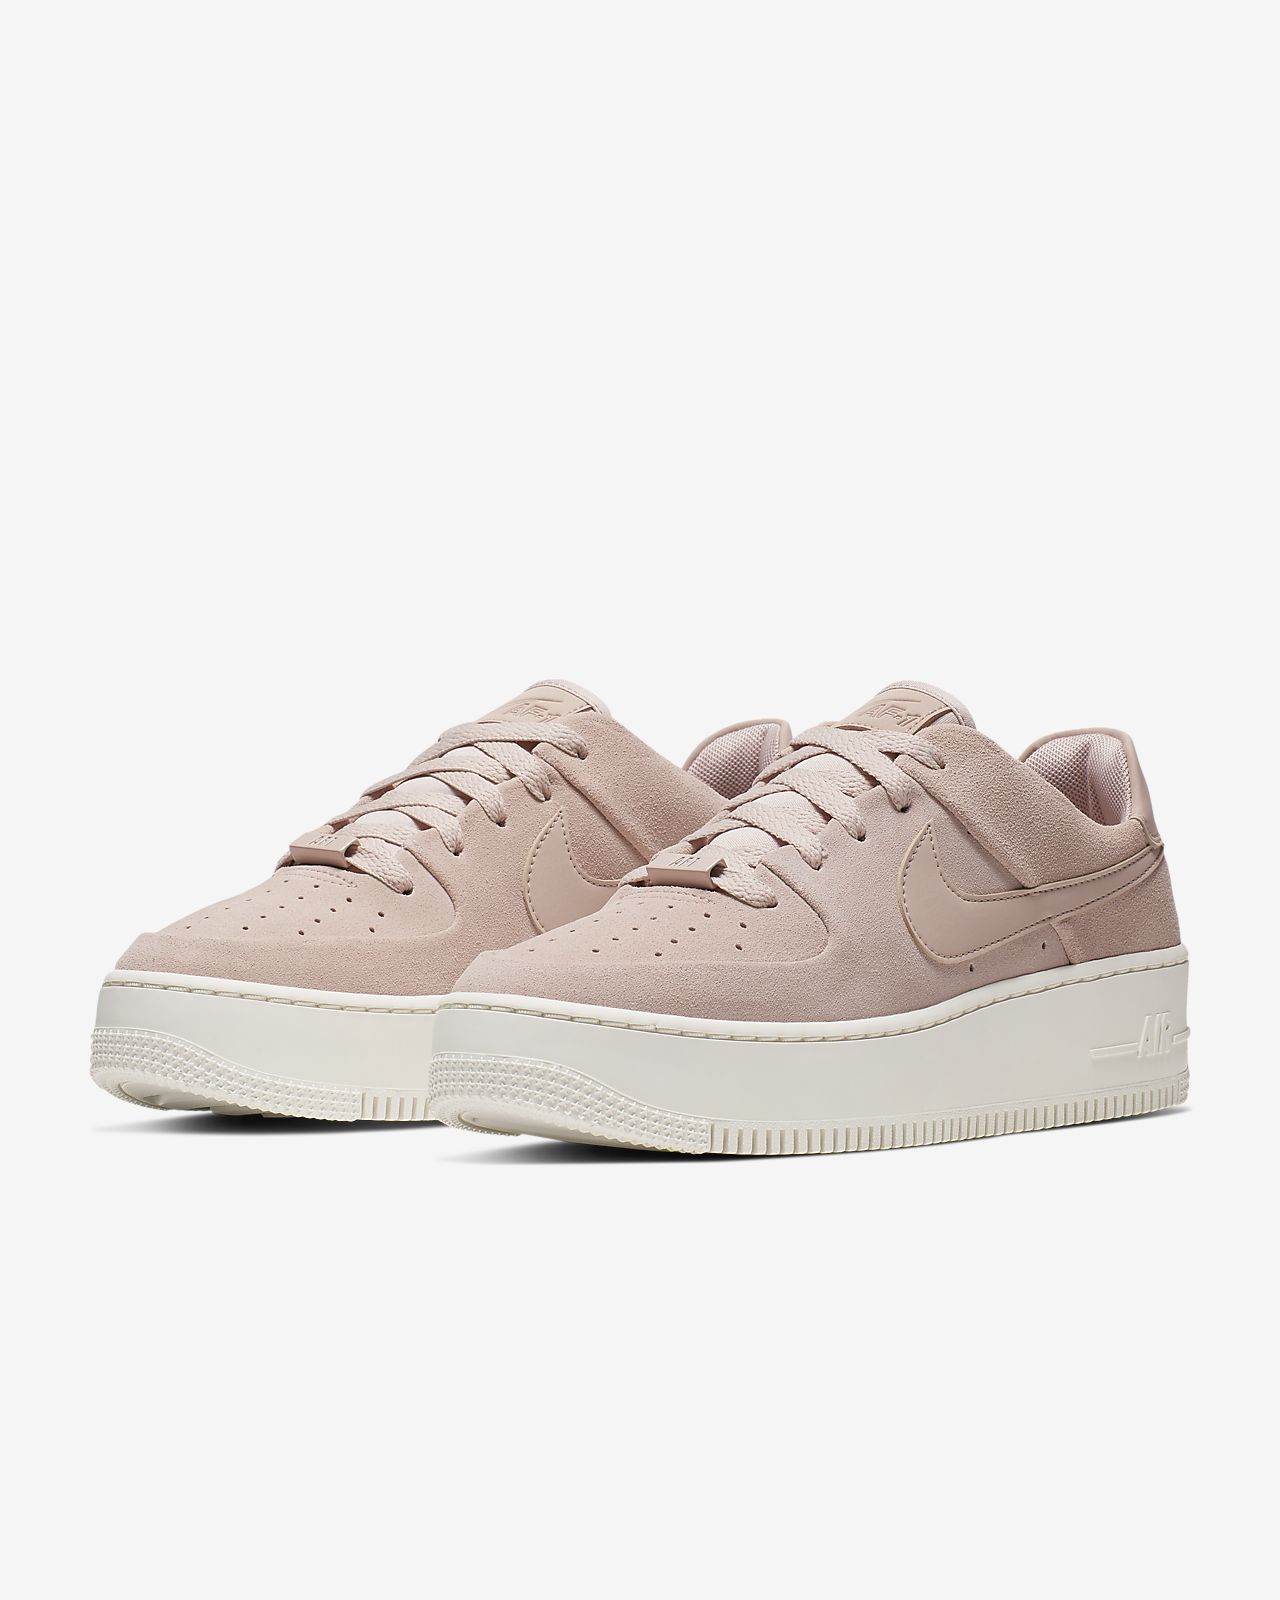 beige air force 1 low premium trainers